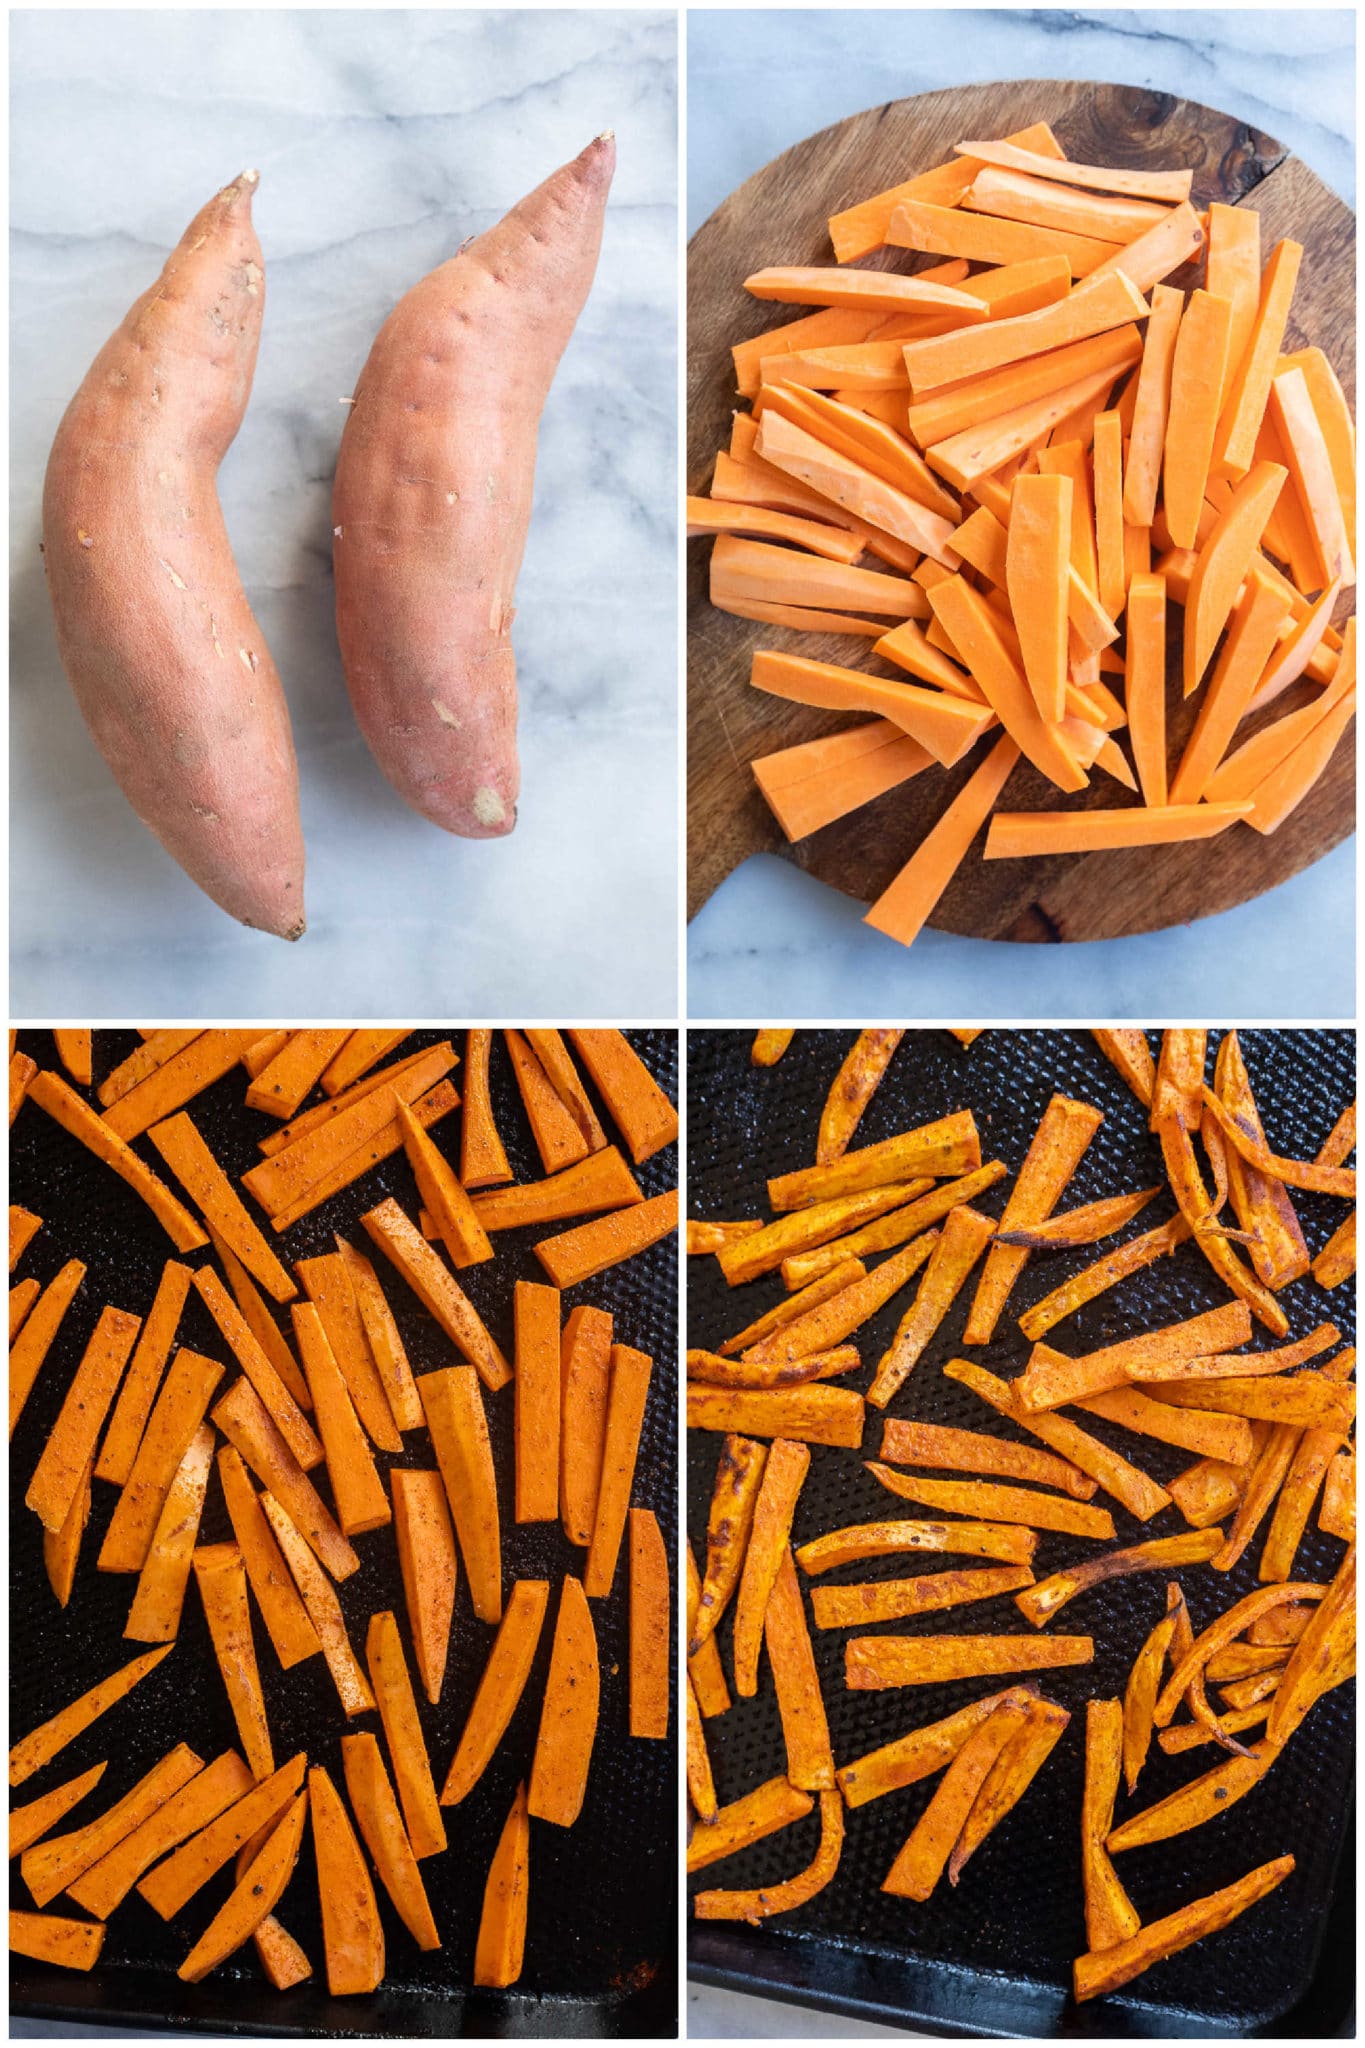 showing how to make roasted sweet potatoes step by step